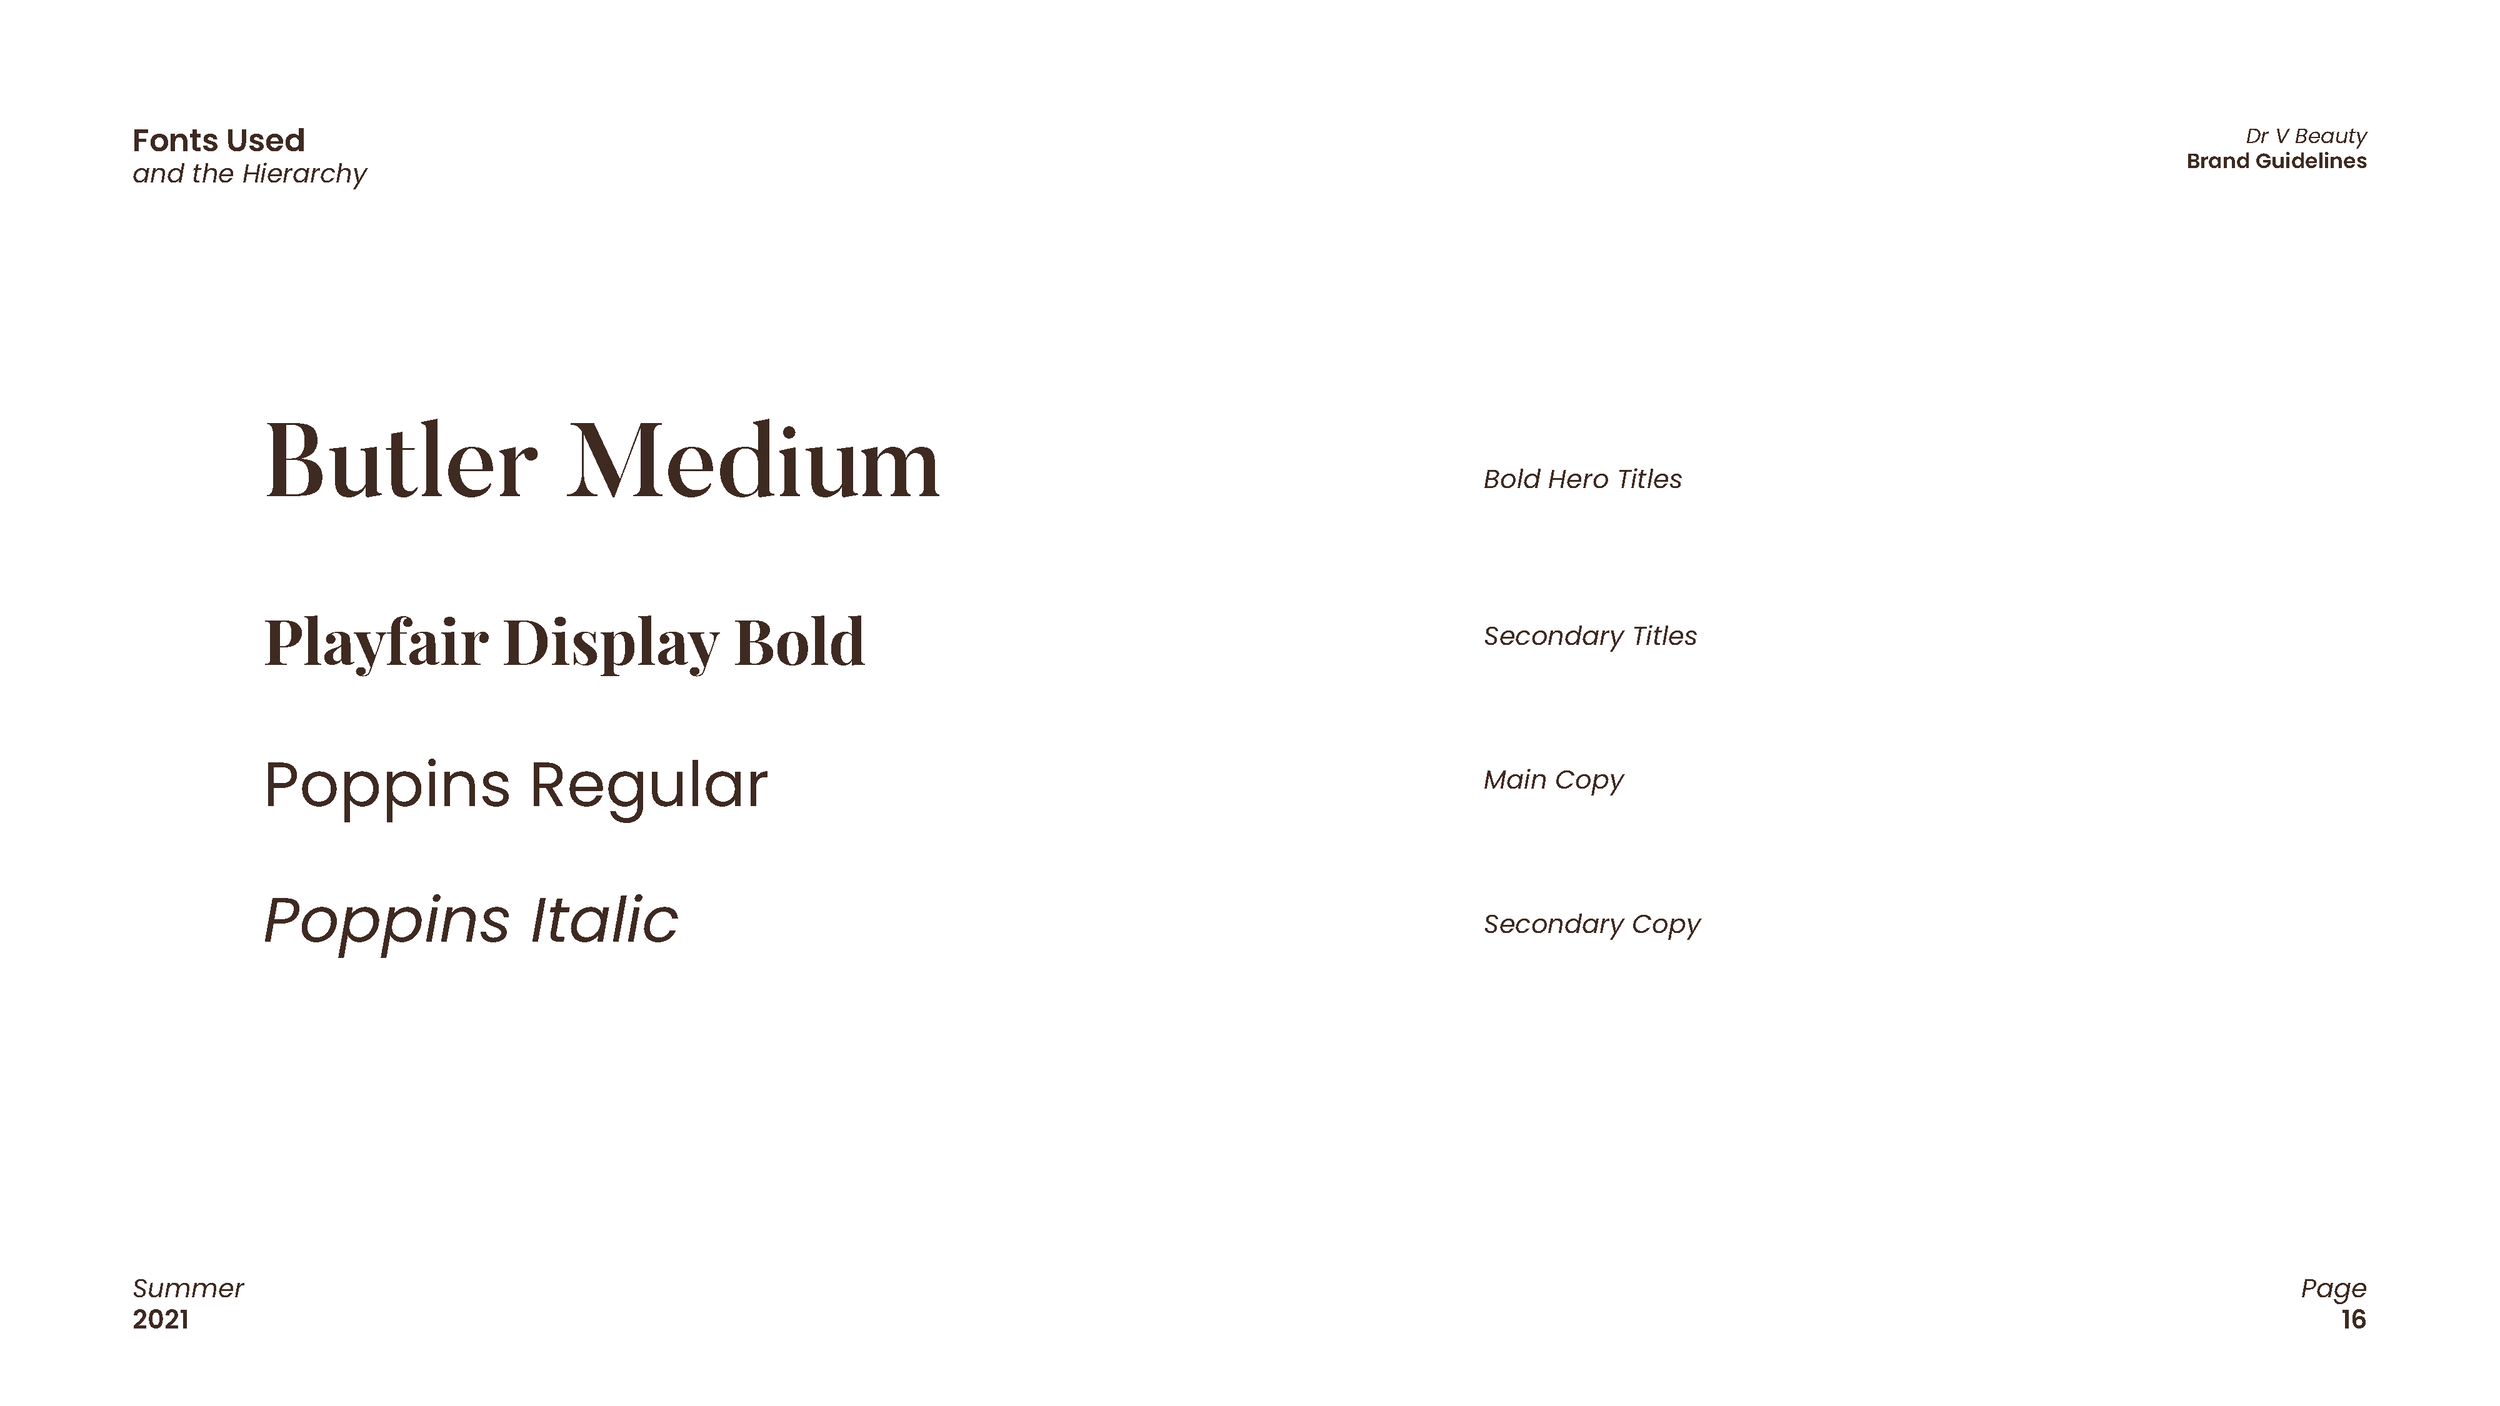 Dr V Beauty - Brand Guidelines_Page_16.png